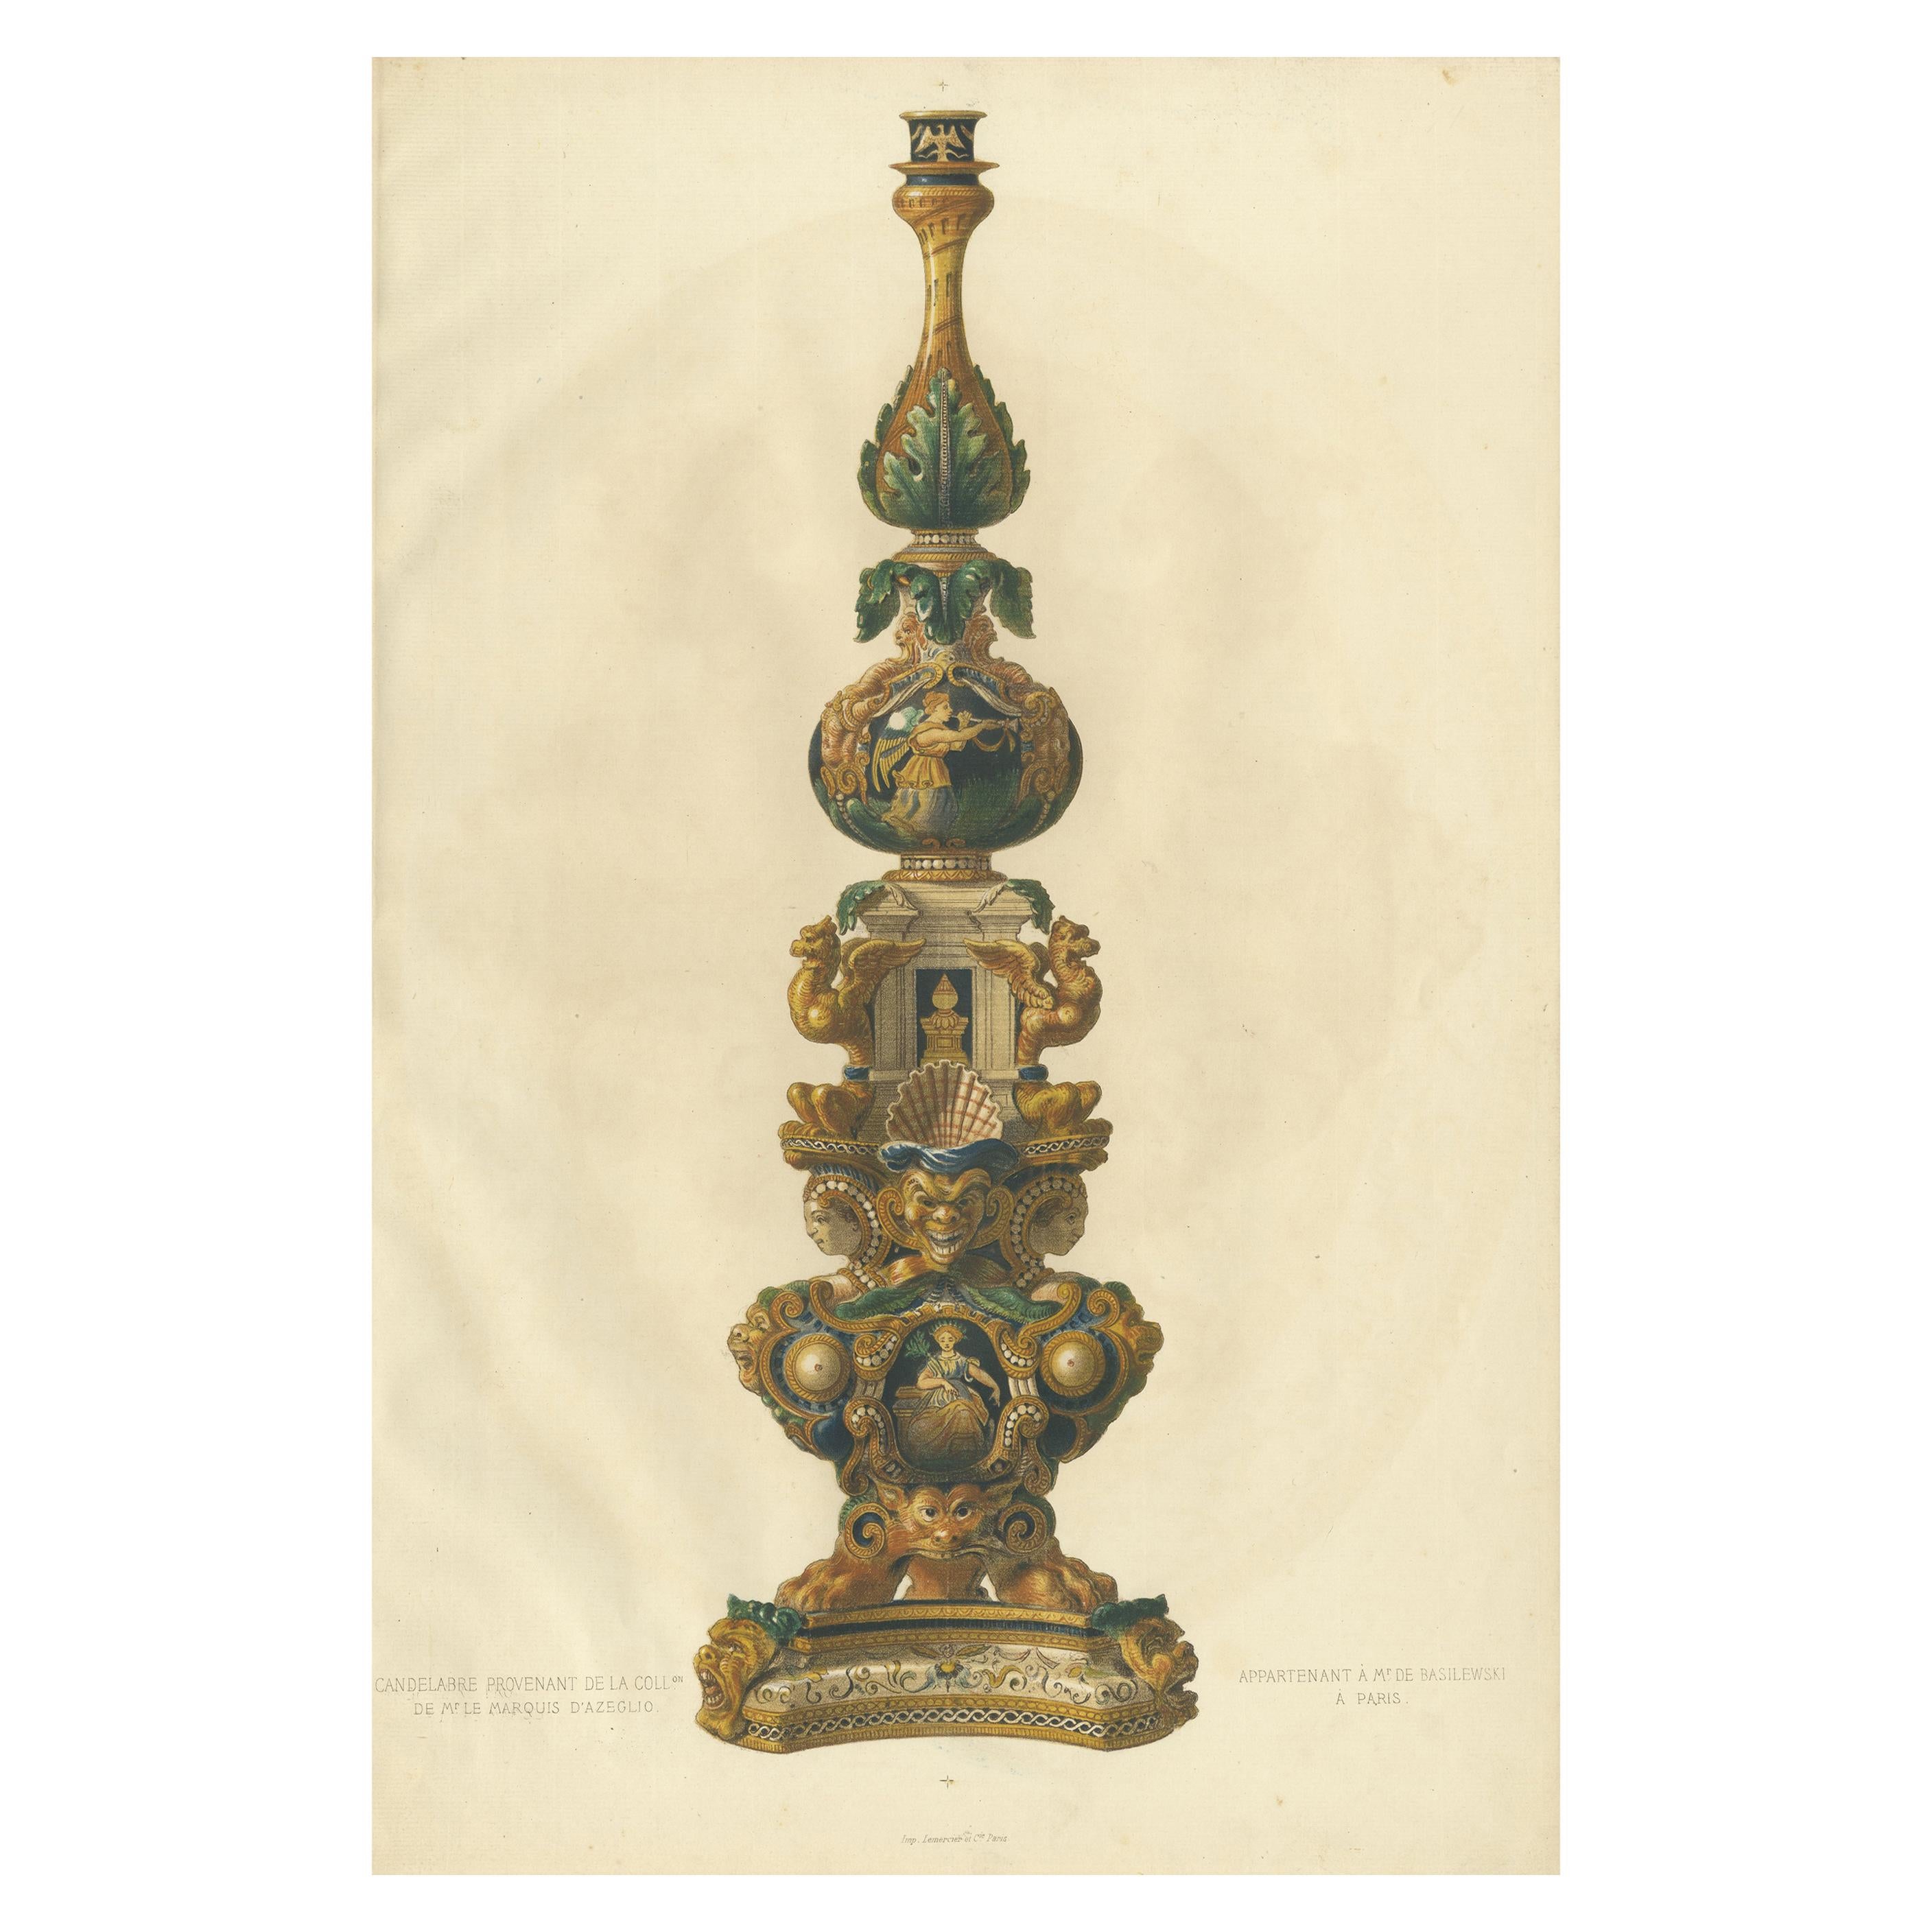 Antique Print of a Candle Holder of Mr. Le Marquis d'Azeglio by Delange '1869'